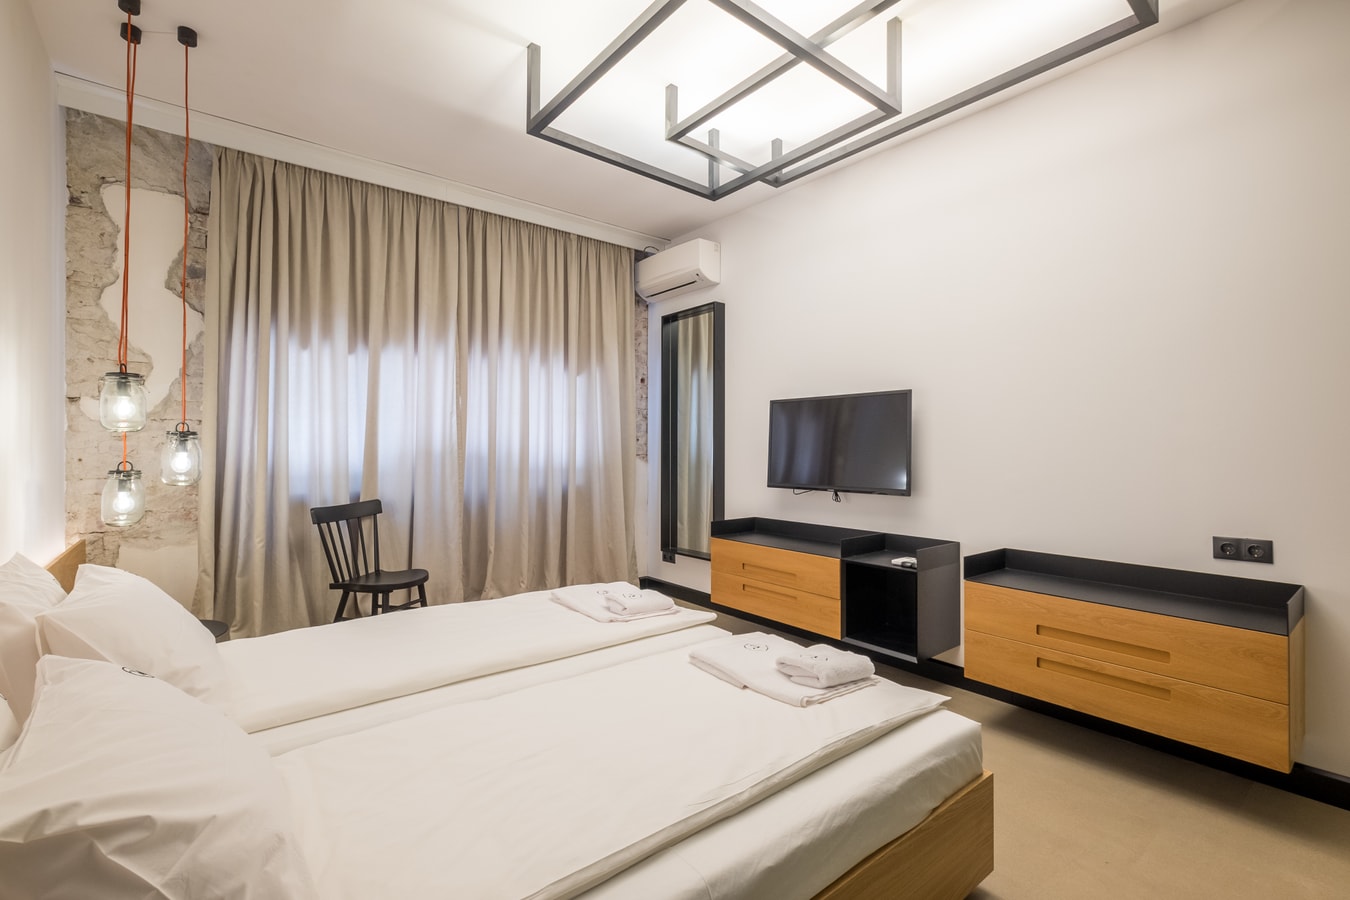 R34 Boutique Hotel - Deluxe Double Room №5 Flataway